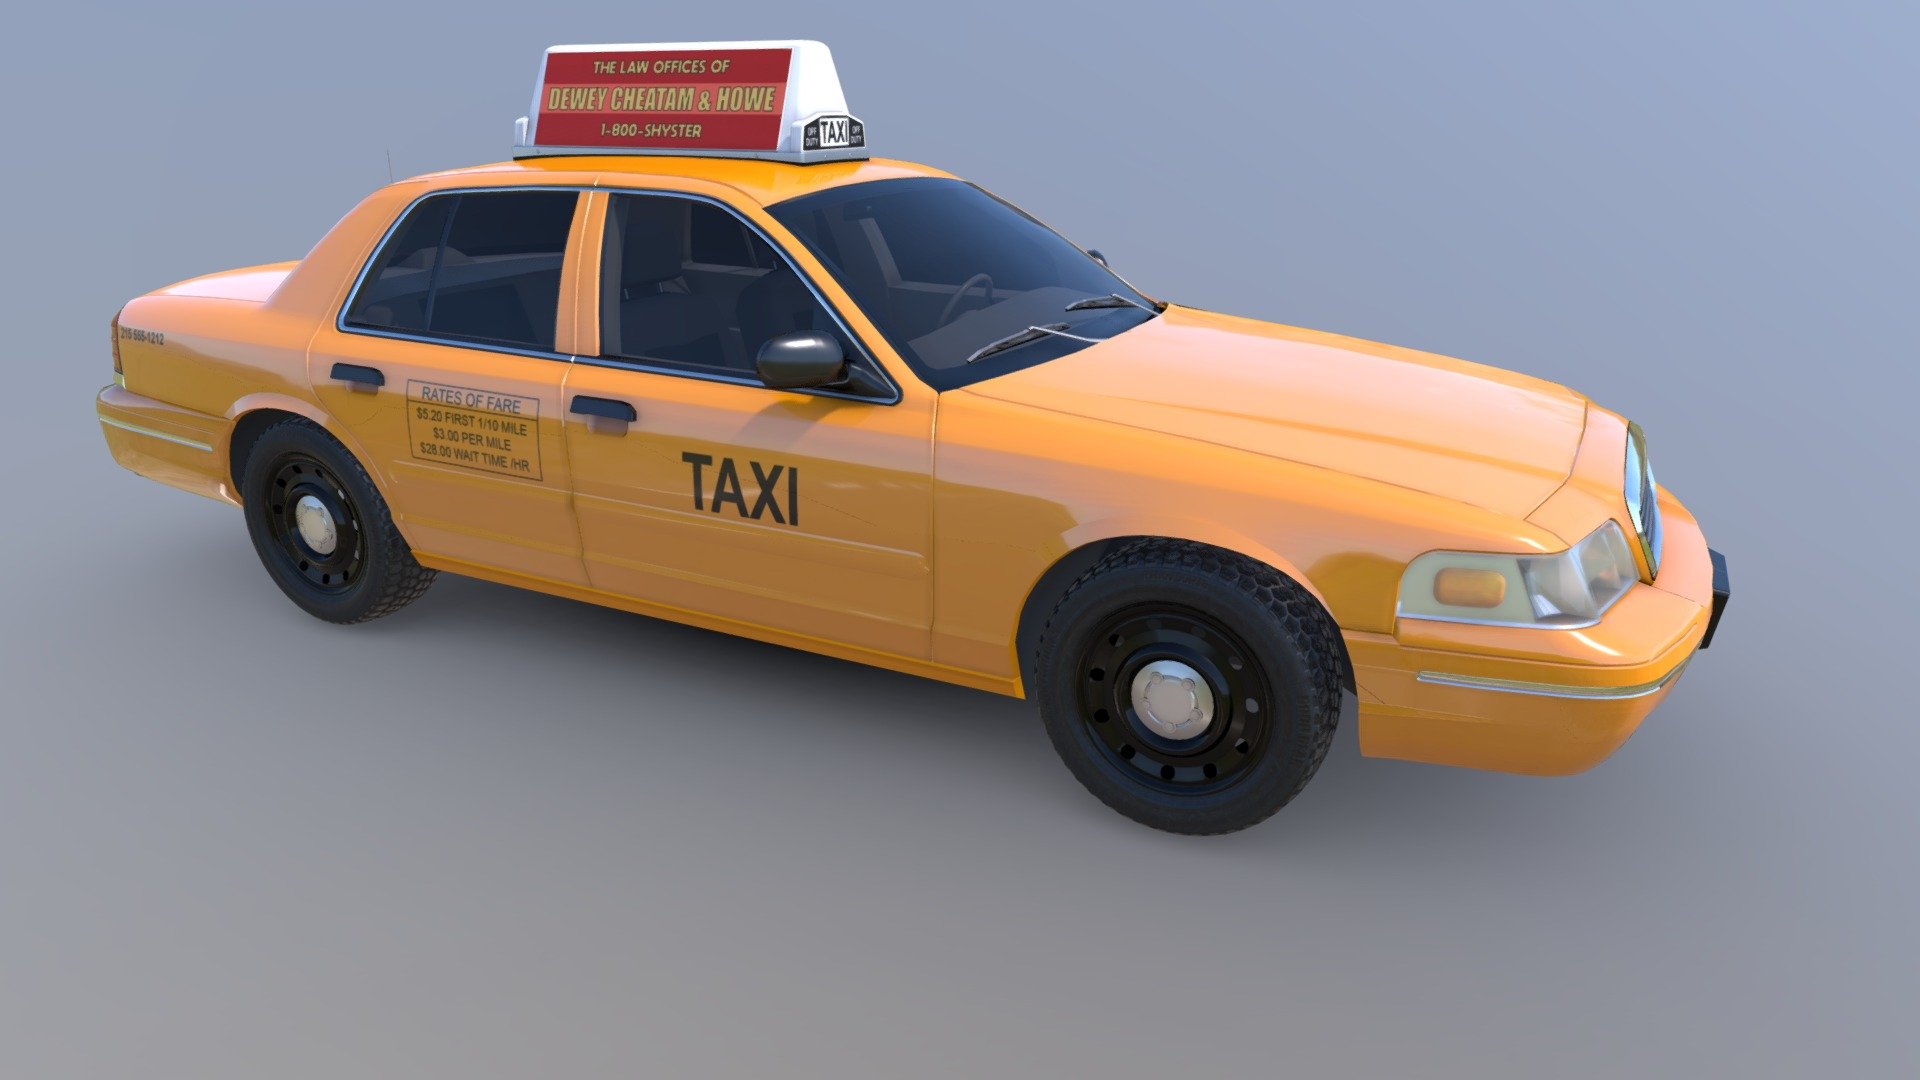 Taxi Cab for the video game Urban Terror 5 on Unreal Engine 4 http://www.urbanterror.info - Taxi Cab - 3D model by joemauke 3d model